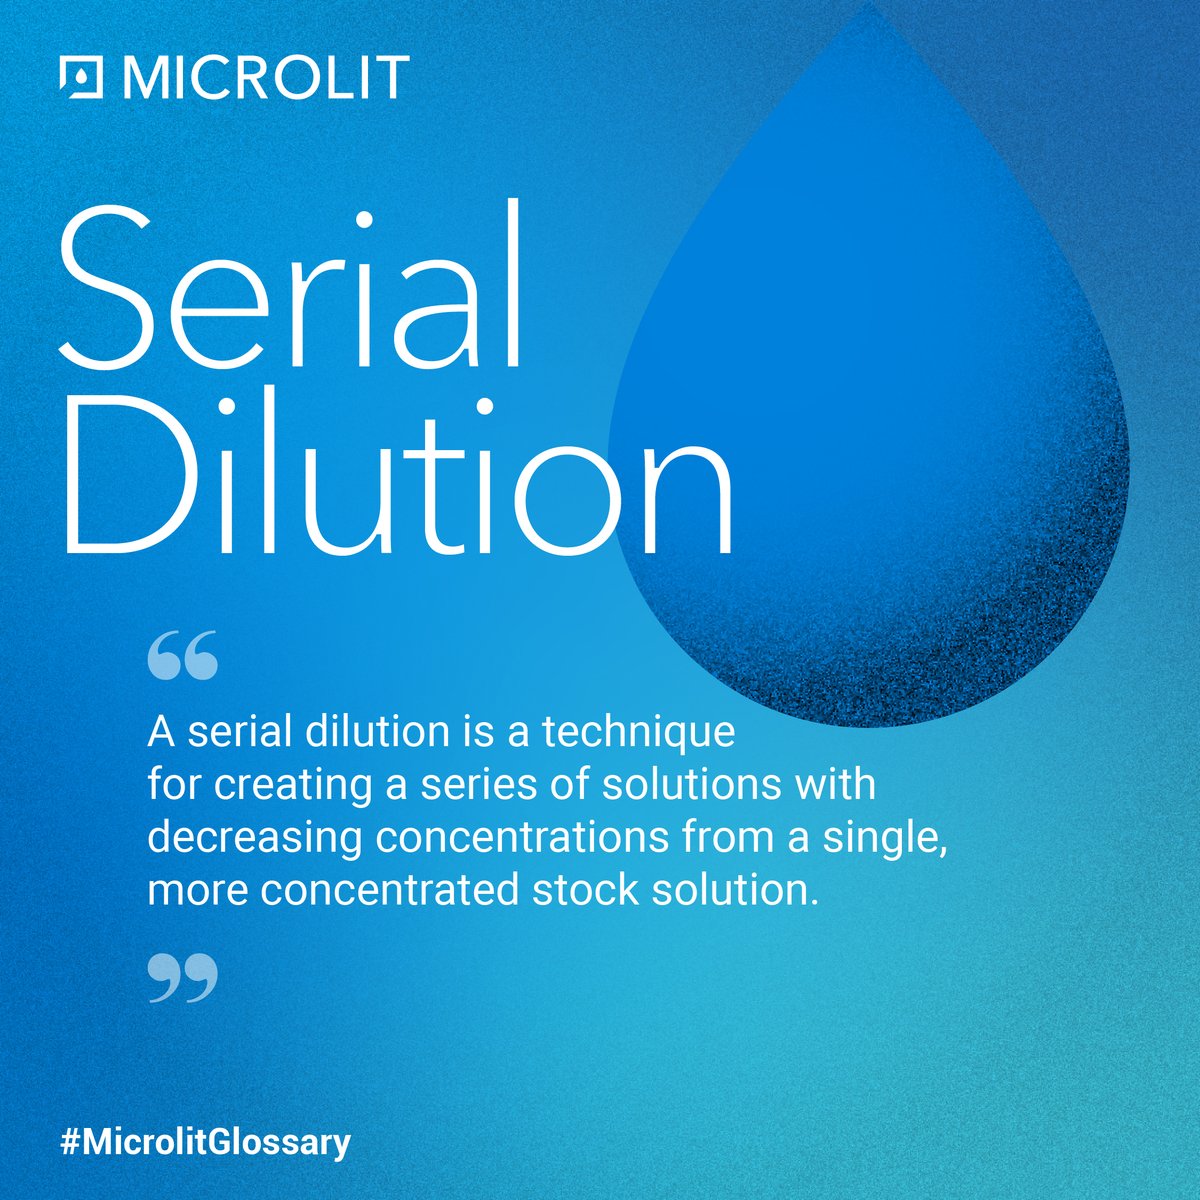 Serial dilution is a versatile and widely used technique in various scientific fields for manipulating the concentration of solutions and achieving desired experimental conditions.

Stay tuned for more such content.

#SerialDilution #MicrolitGlossary #Science #Information #Labs